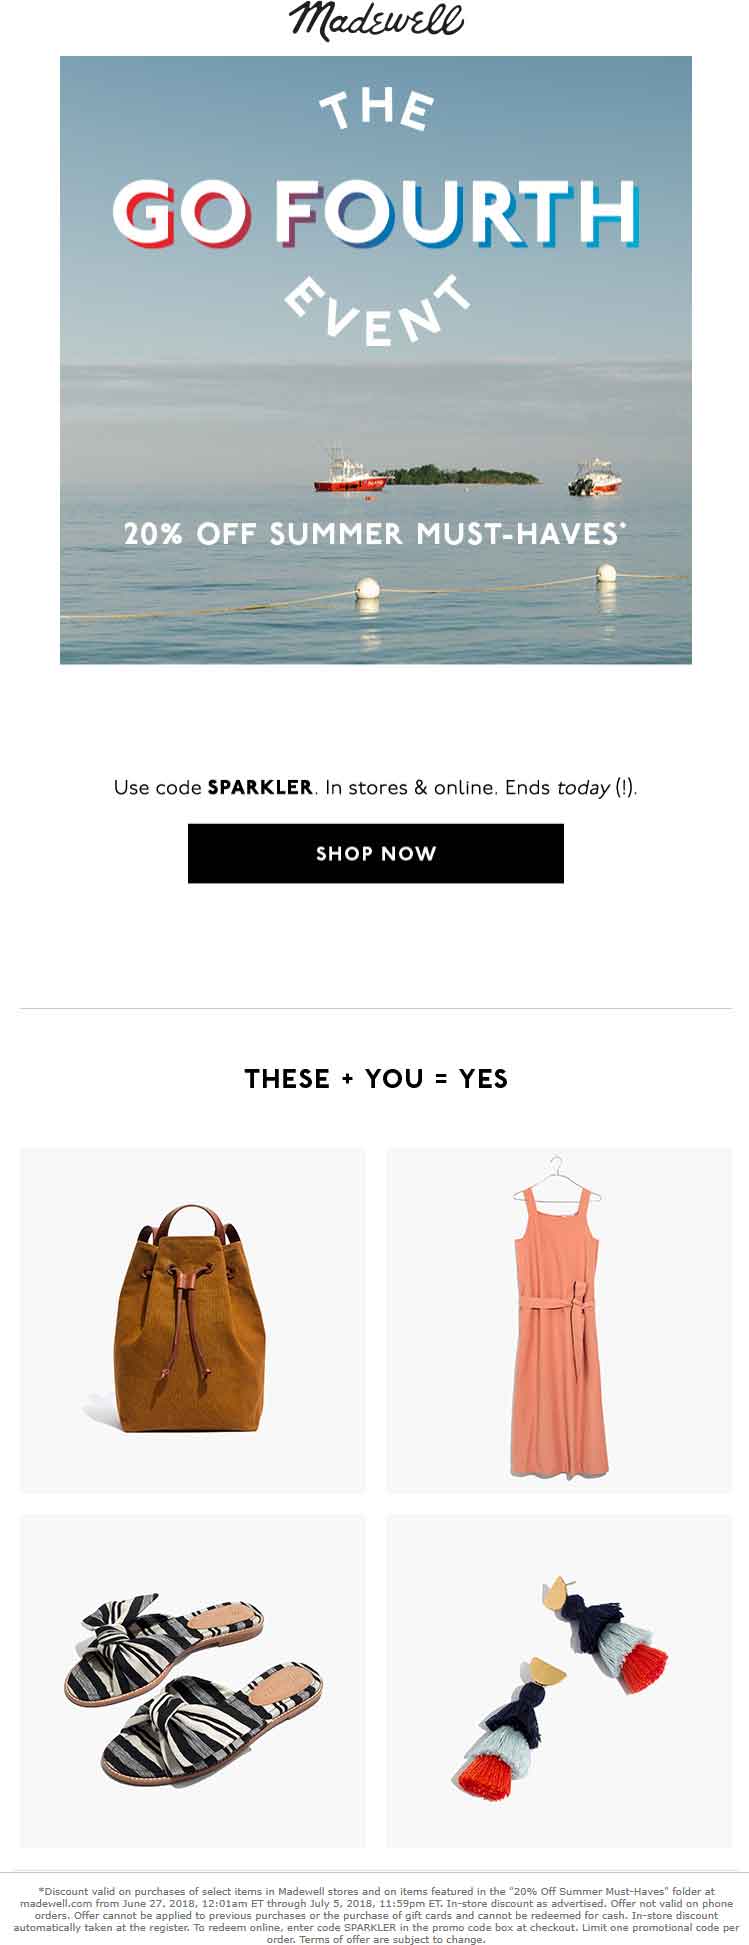 Madewell August 2021 Coupons and Promo Codes 🛒